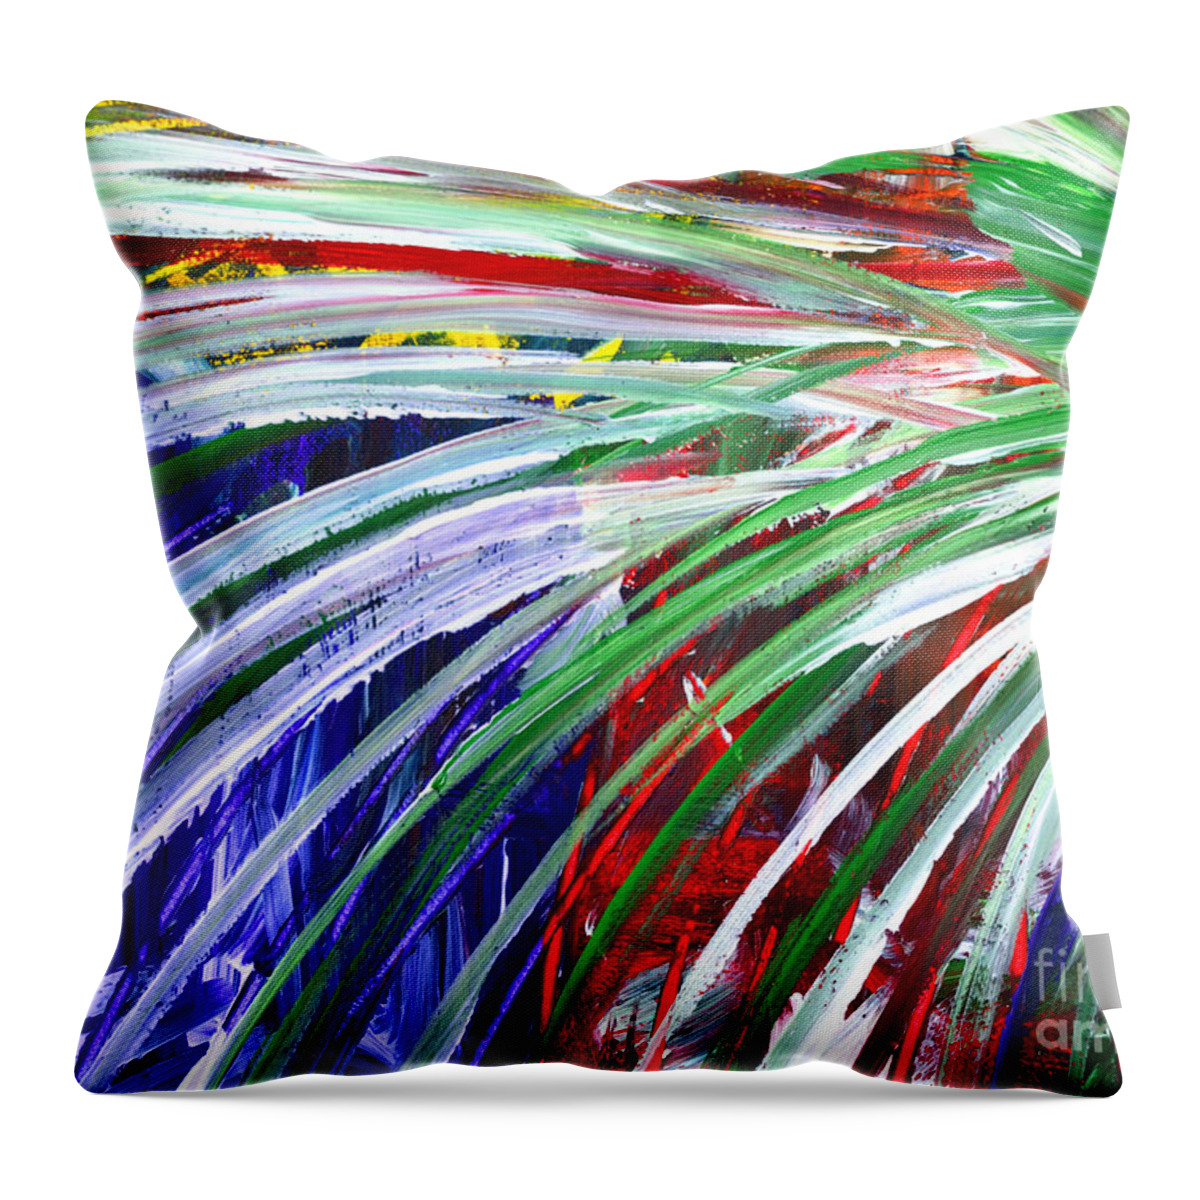 Martha Throw Pillow featuring the painting Abstract Series C1015BL by Mas Art Studio